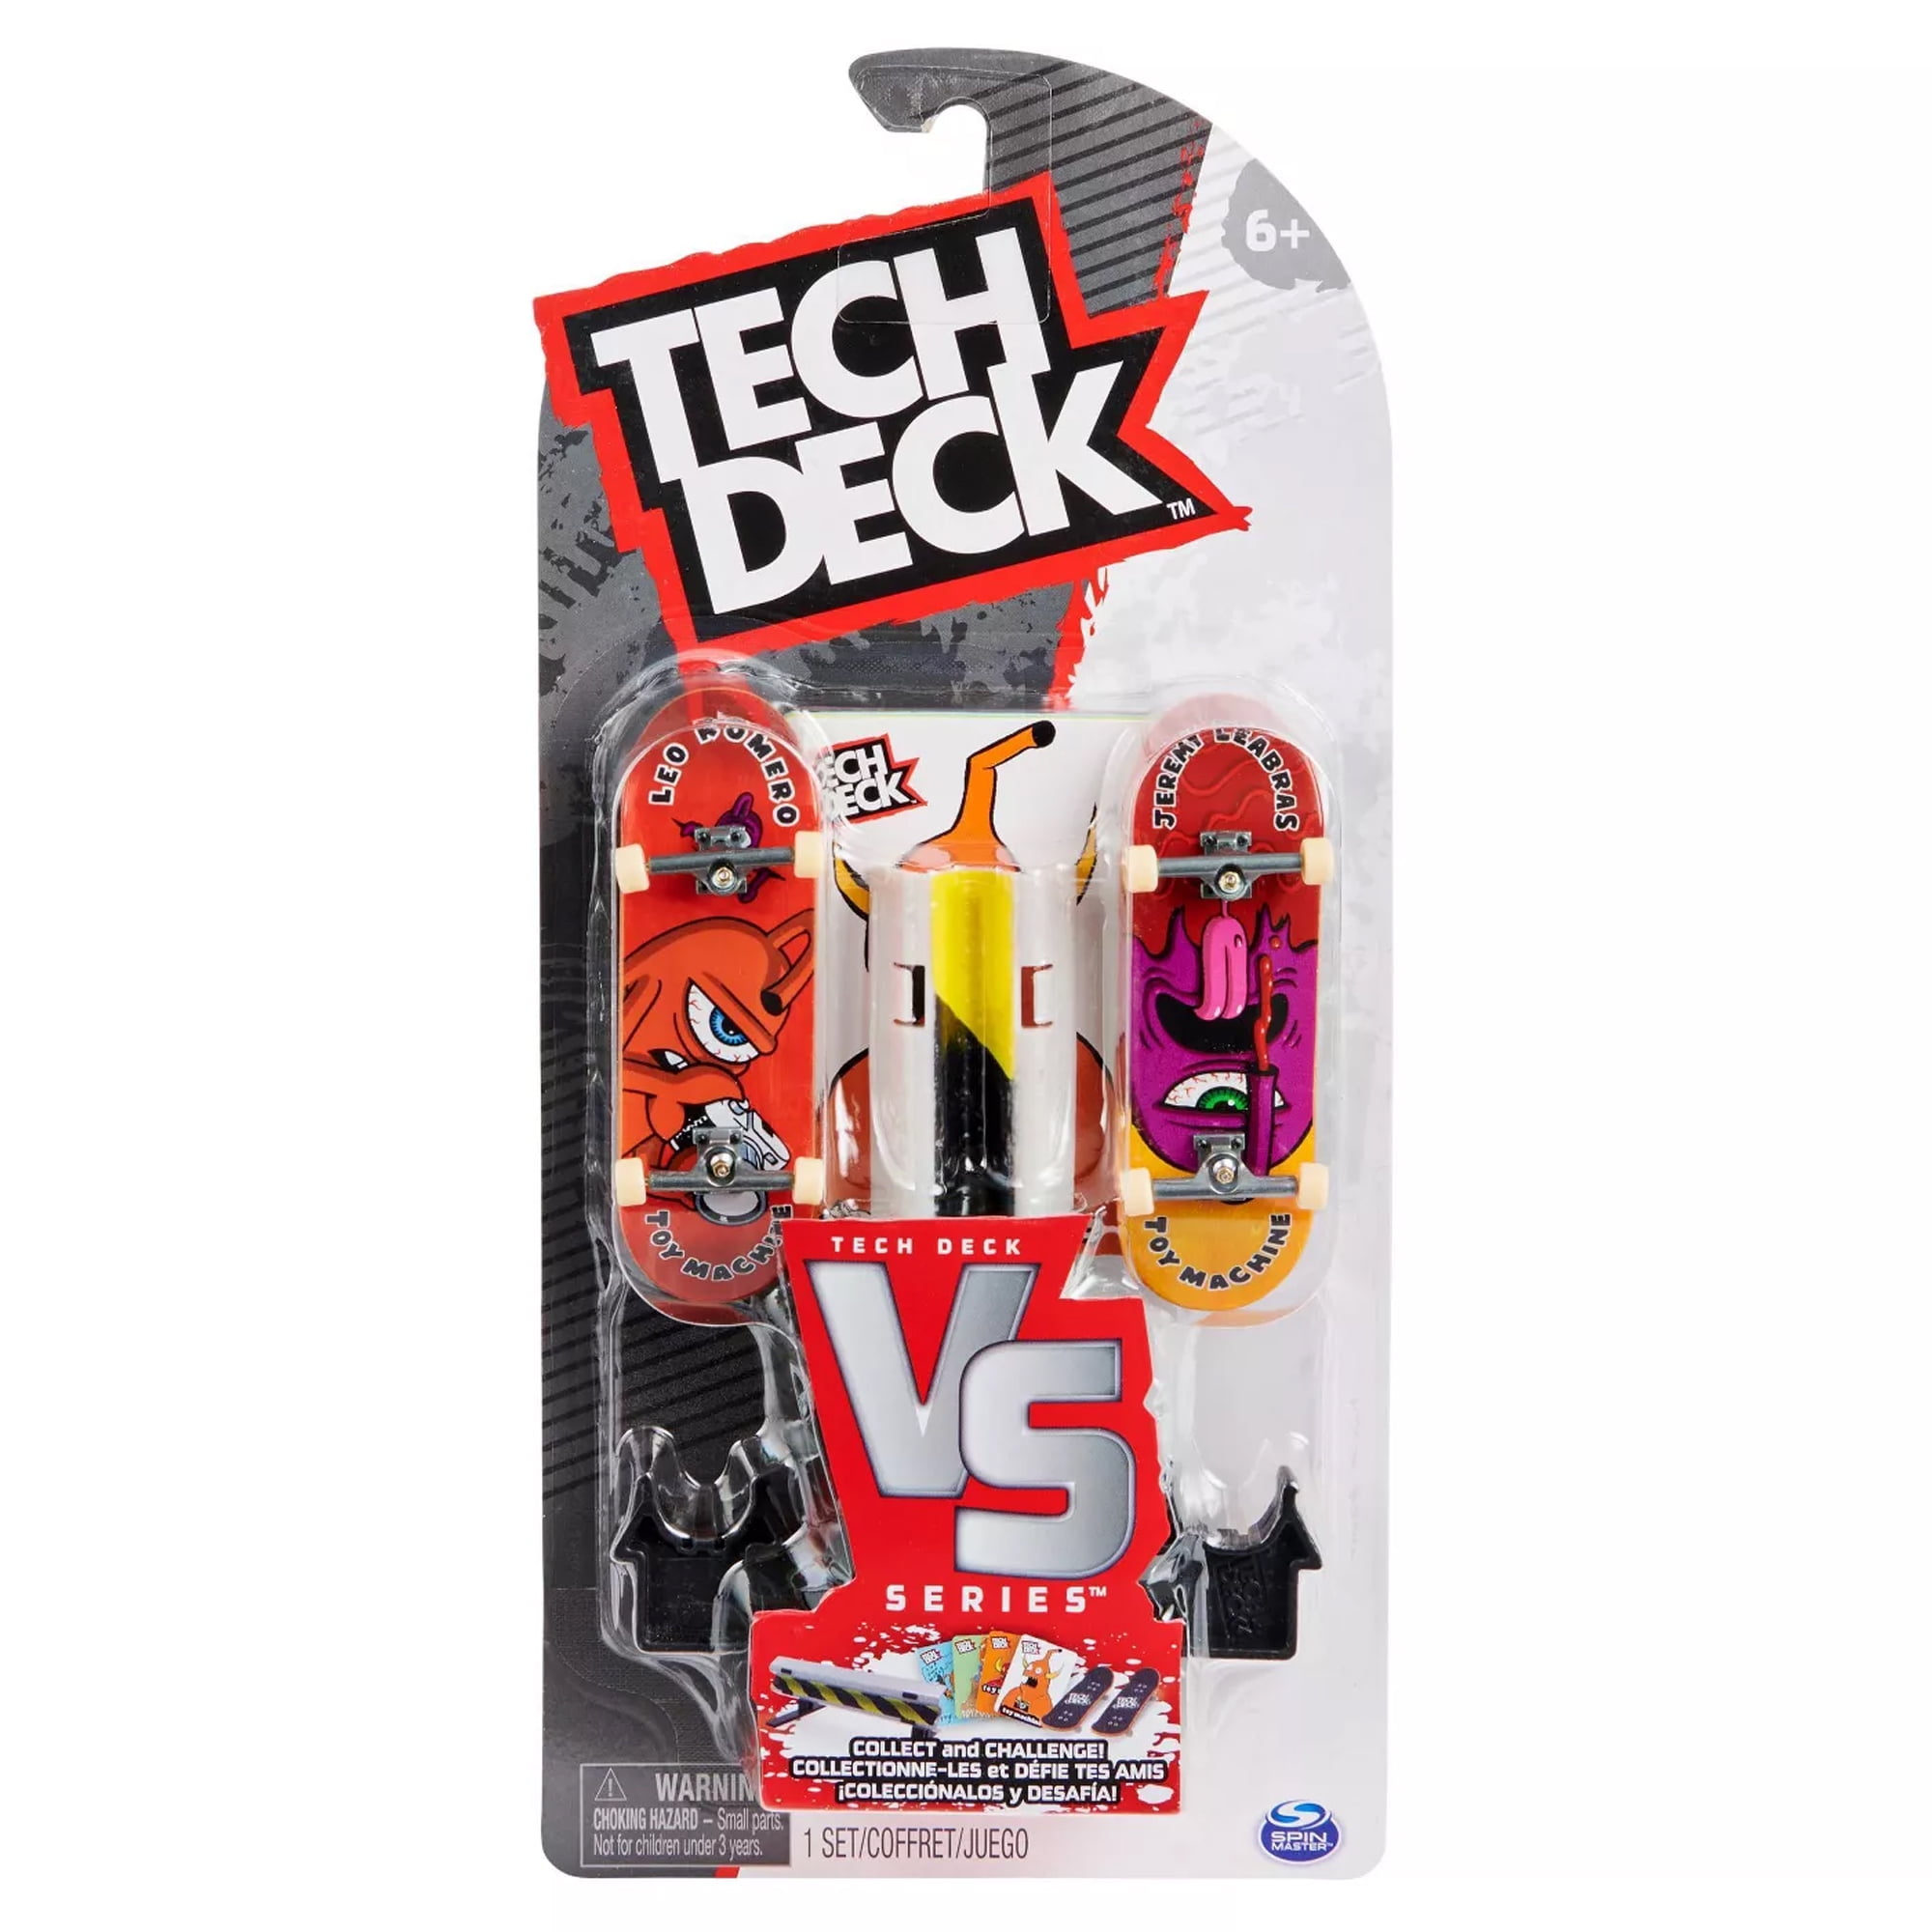 2020 Tech Deck Street Hits Blind Skate Fingerboard Obstacle Picnic Table for sale online 